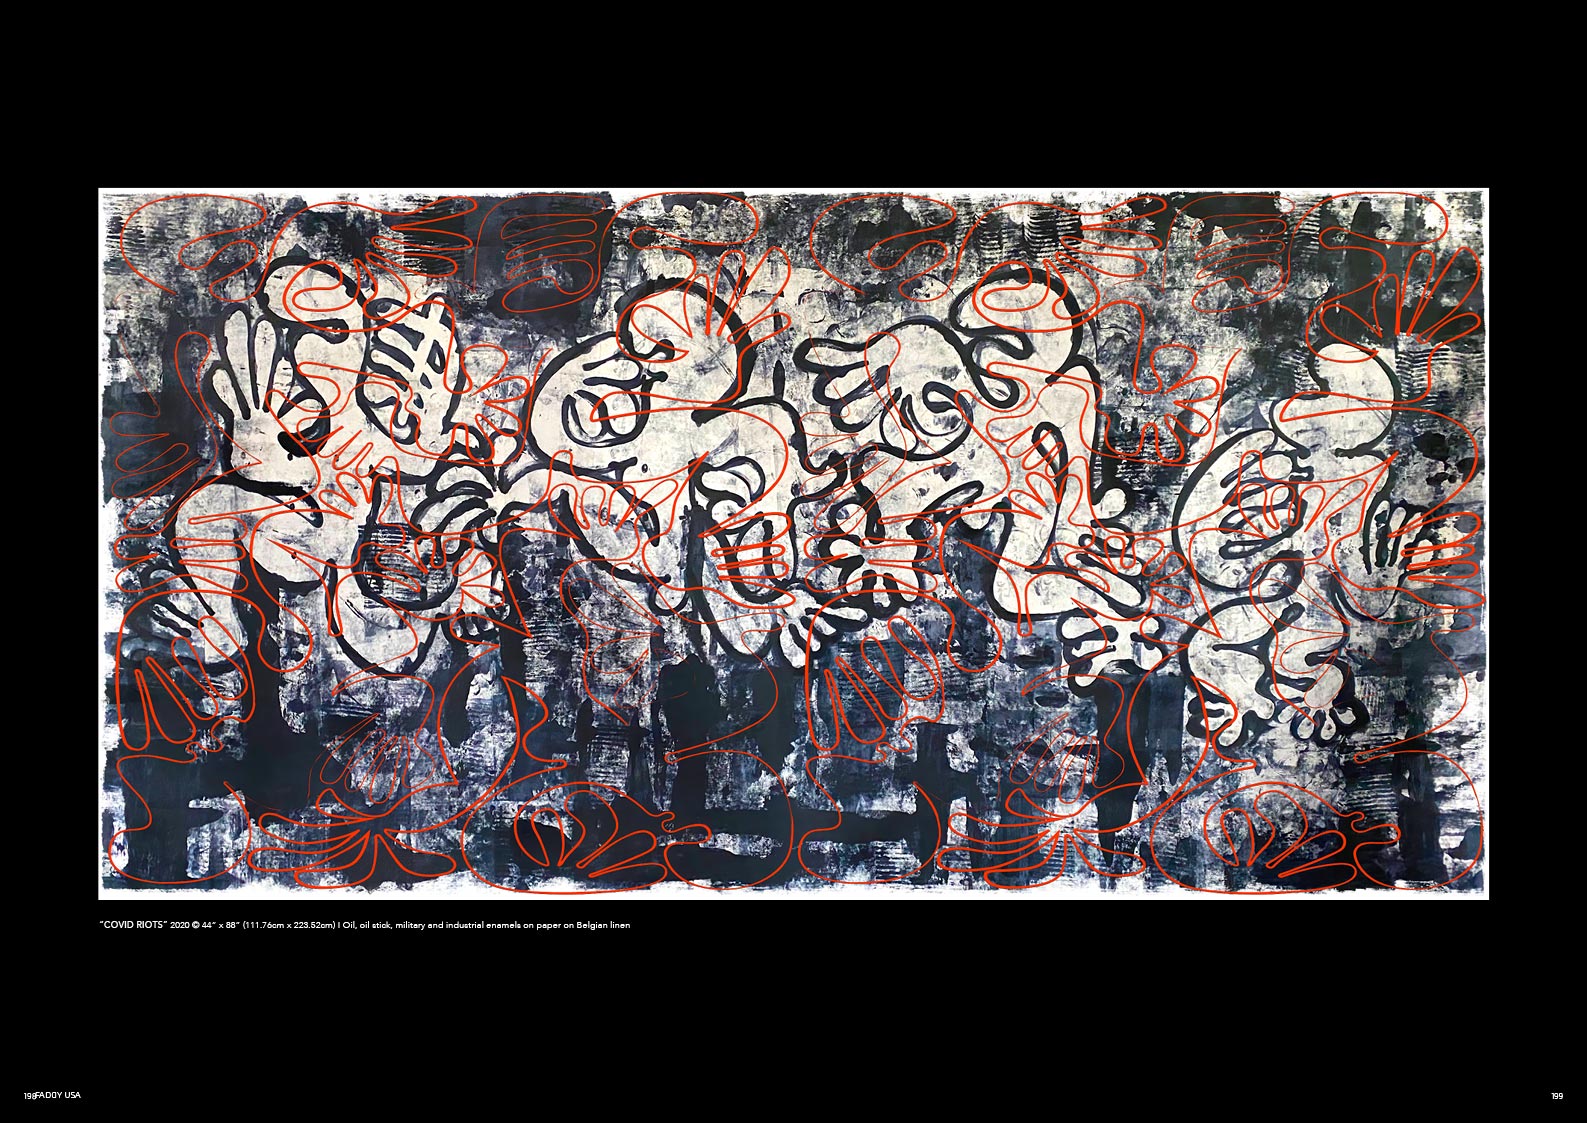 “COVID riots” 2020 © 44” x 88” (111.76cm x 223.52cm) I Oil, oil stick, military and industrial enamels on paper on Belgian linen